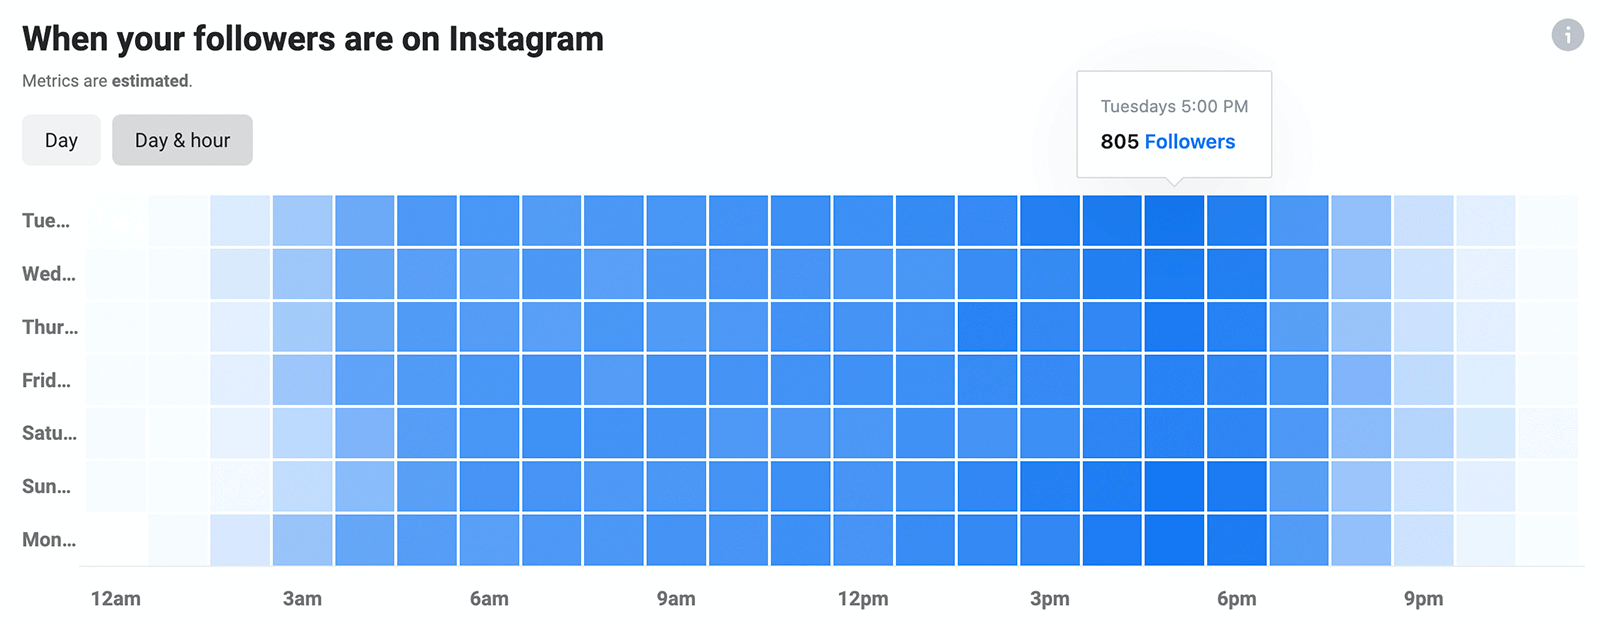 image of When Your Followers Are on Instagram chart